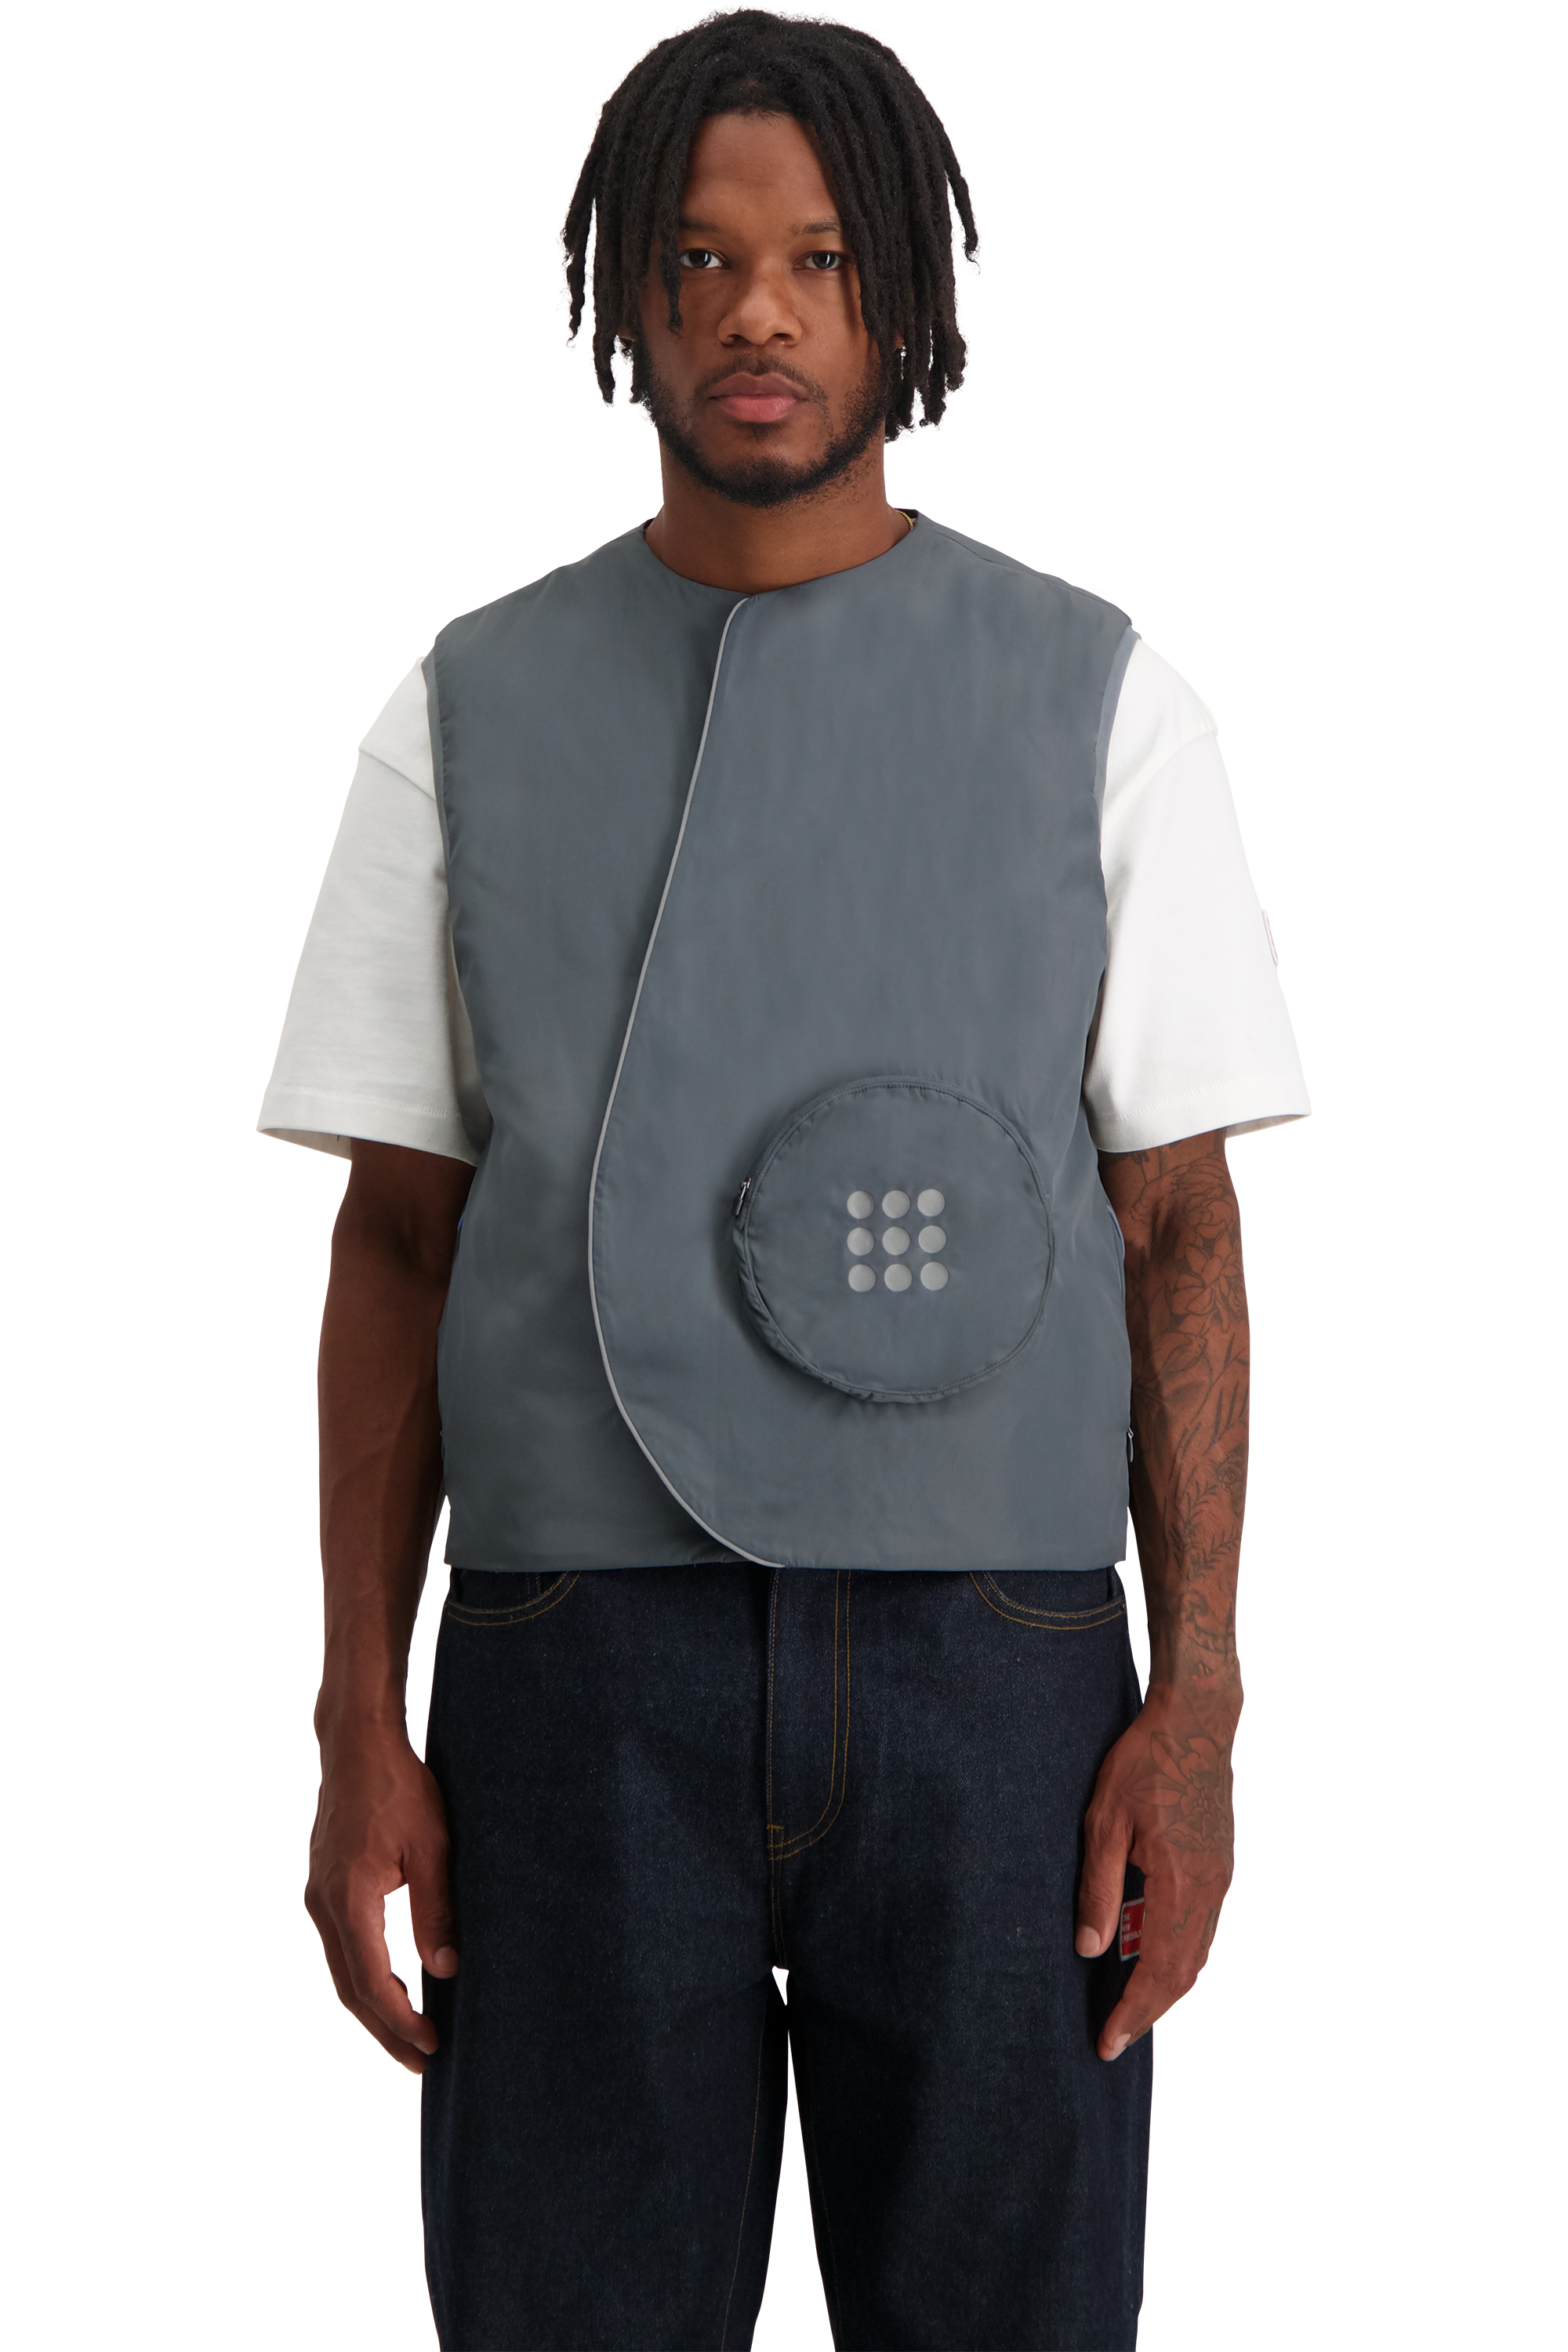 products-9dotswalkmanvest_torso_tiff_1copynew-png